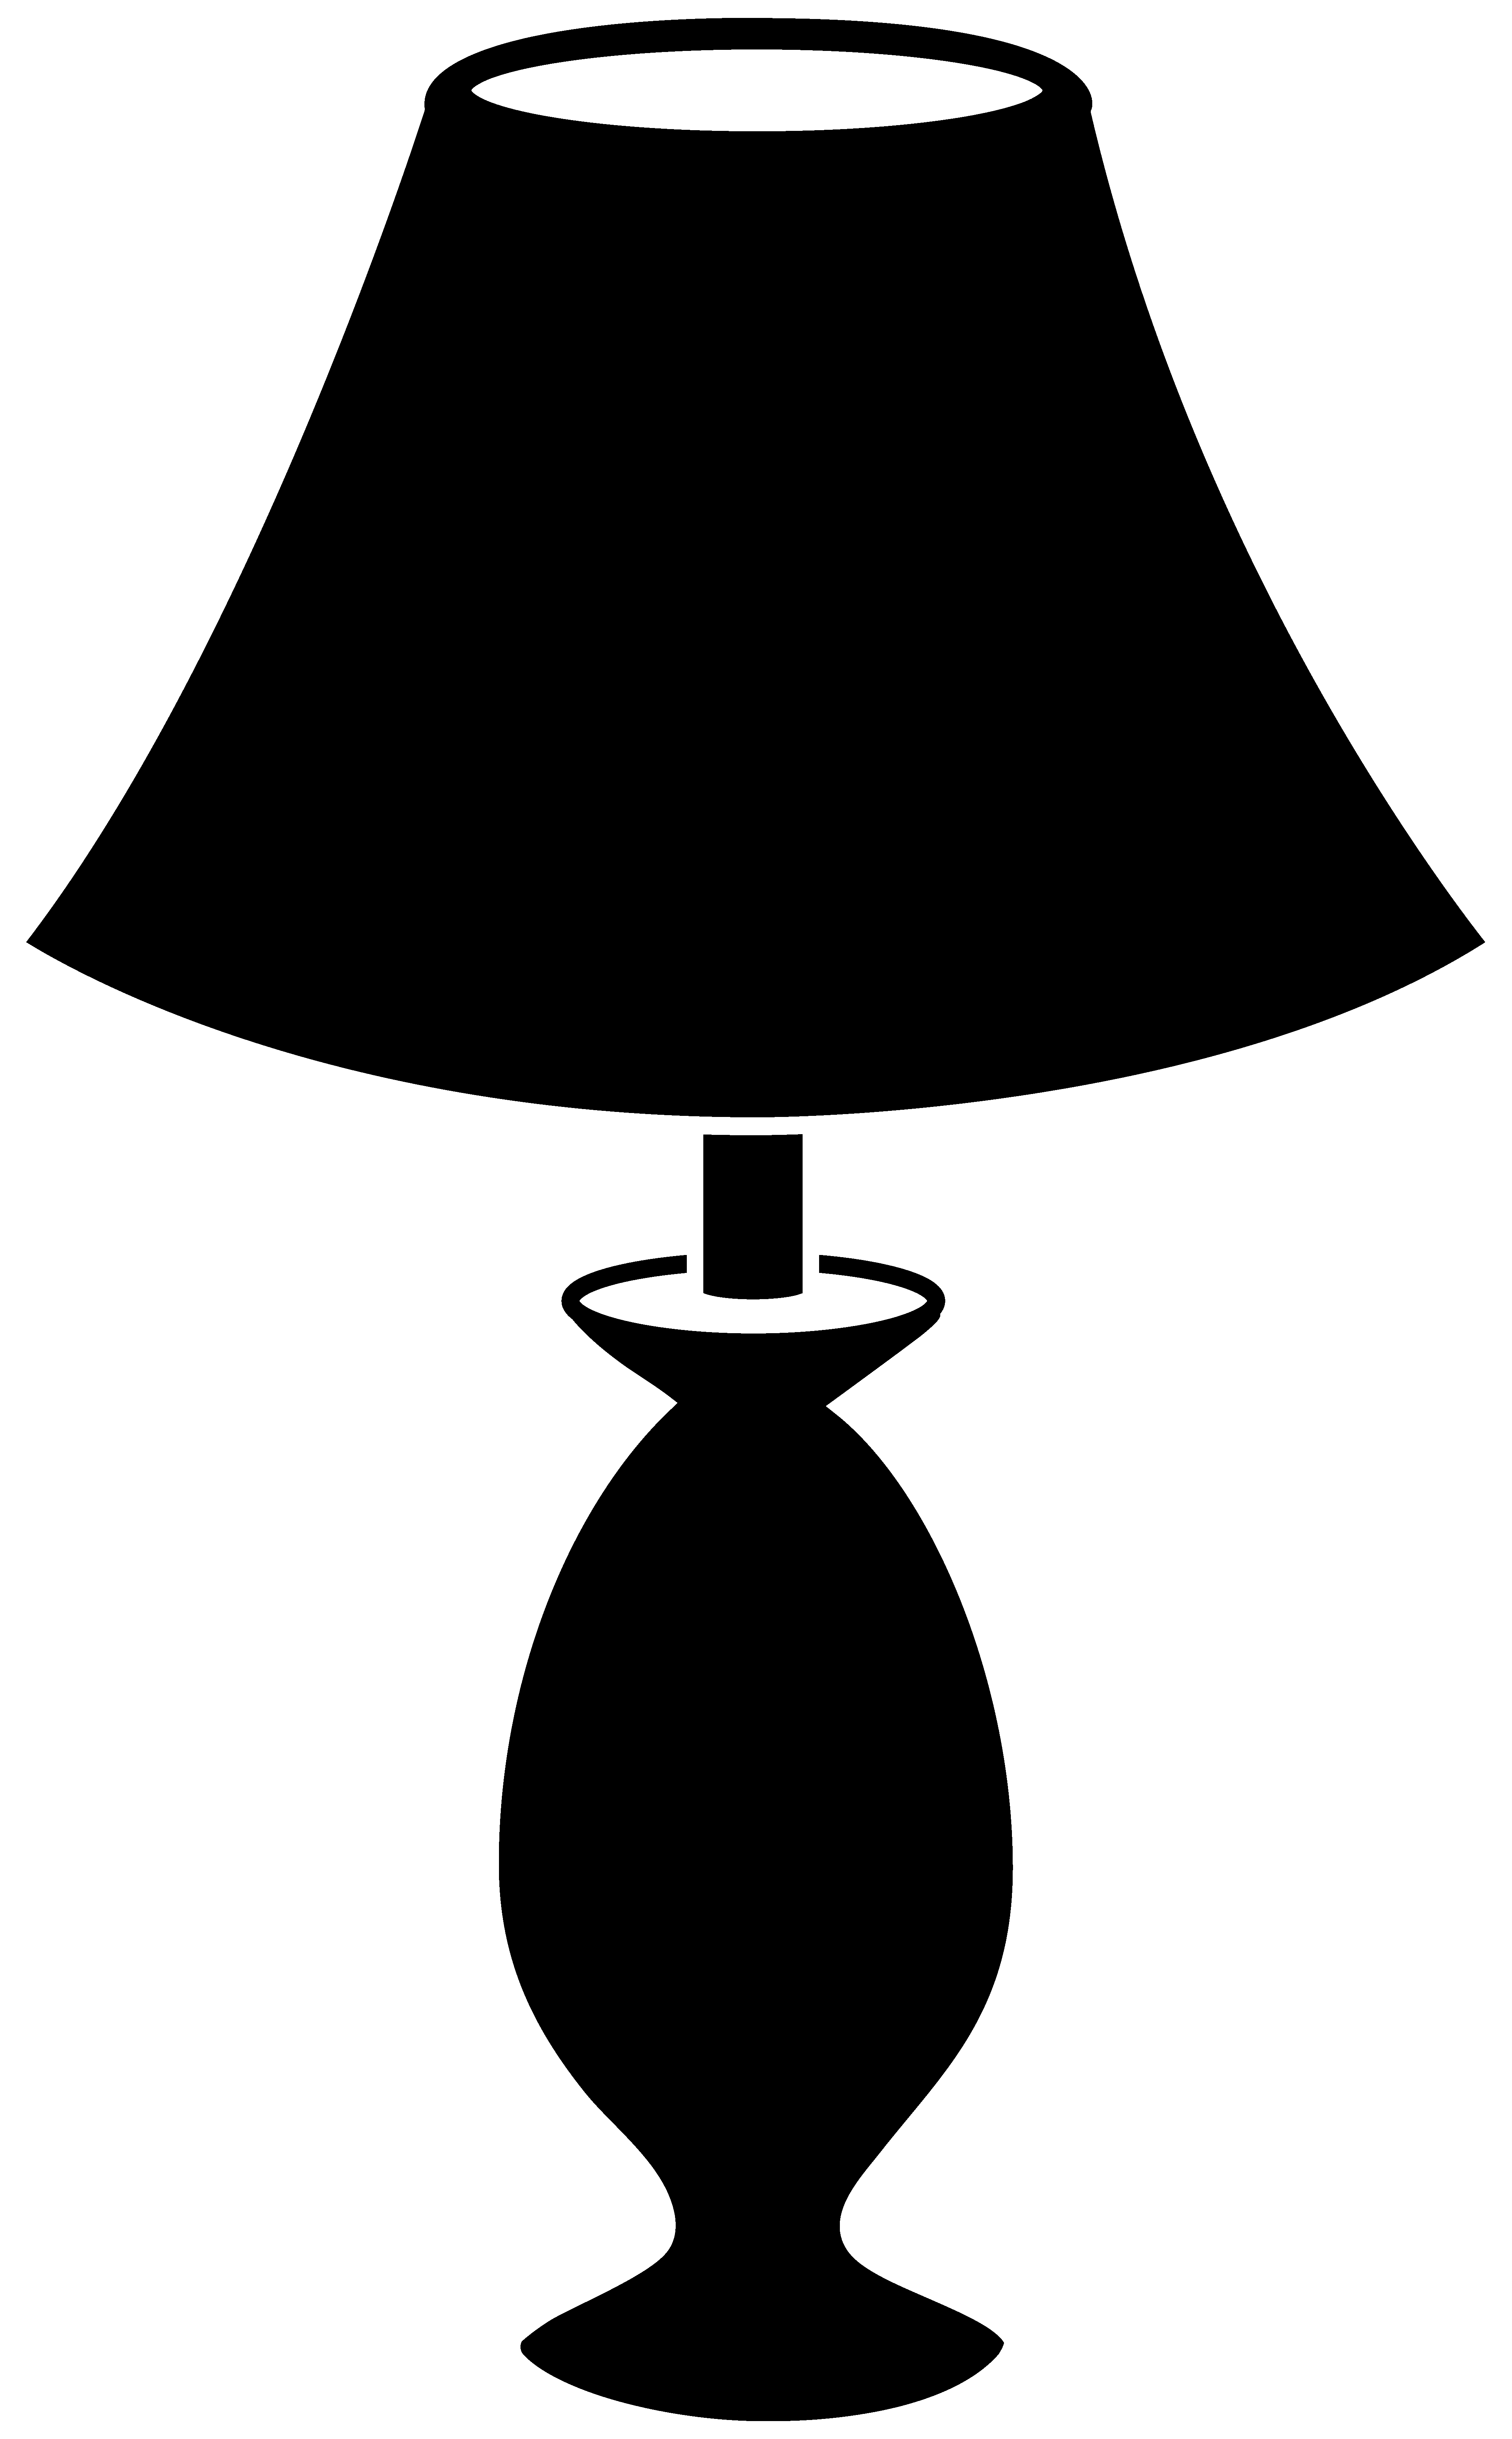 Lamp Clipart Black And White | Clipart Panda - Free Clipart Images